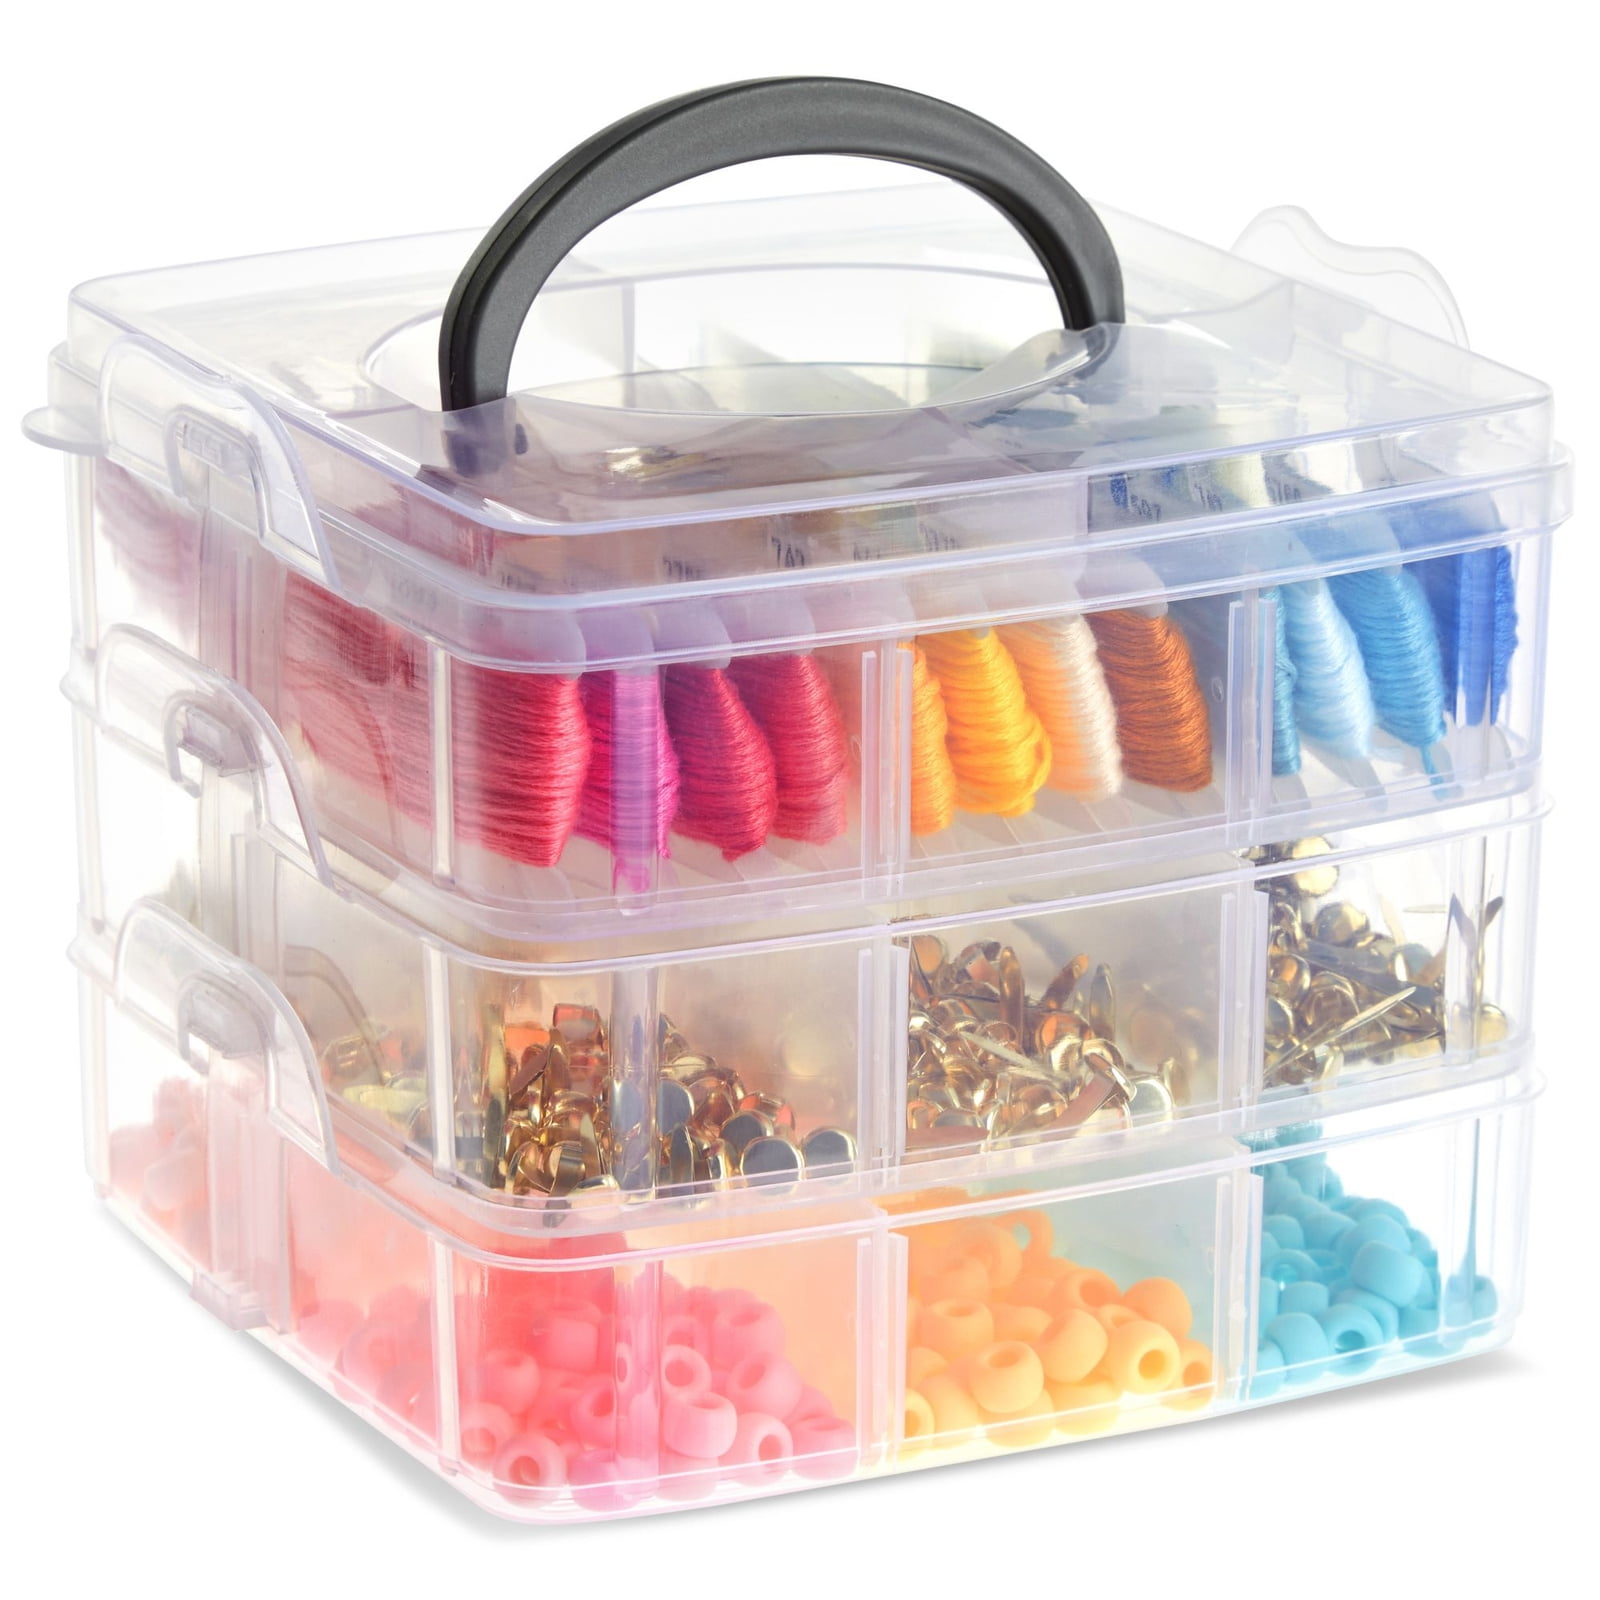 Wholesale Plastic Coil box with 144 Colorful Sewing Thread Bobbin Storage  Box Sewing Machine Accessories Set From m.